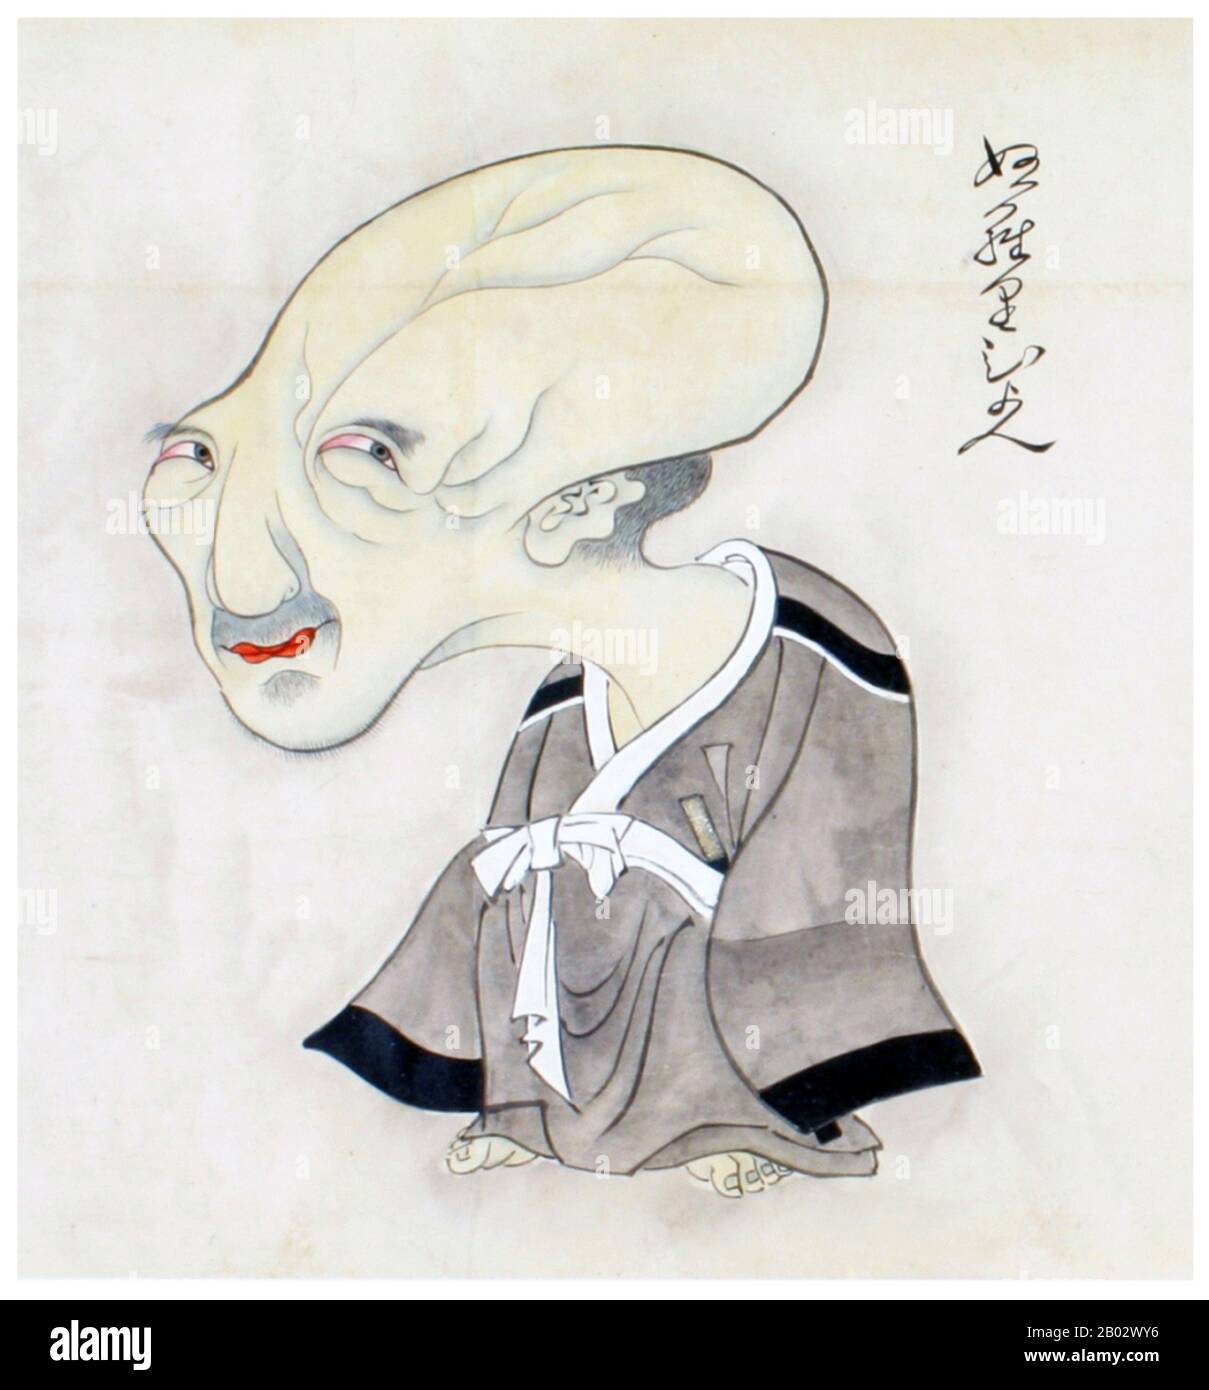 Nurarihyon or Nurihyon is a Japanese yokai (a supernatural monster in folklore) said to originate from Wakayama Prefecture. Nurarihyon is usually depicted as an old man with a gourd-shaped head and wearing a kesa robe. He is sometimes said to be leader of the yōkai.  Nurarihyon will sneak into someone's house while they are away, drink their tea, and act as if it is his own house. Because it looks human, anyone who sees him will mistake him for the owner of the house, making it very hard to expel him. Nurarihyon is the leader of the Hyakki Yako Night Parade of 100 Demons. Stock Photo